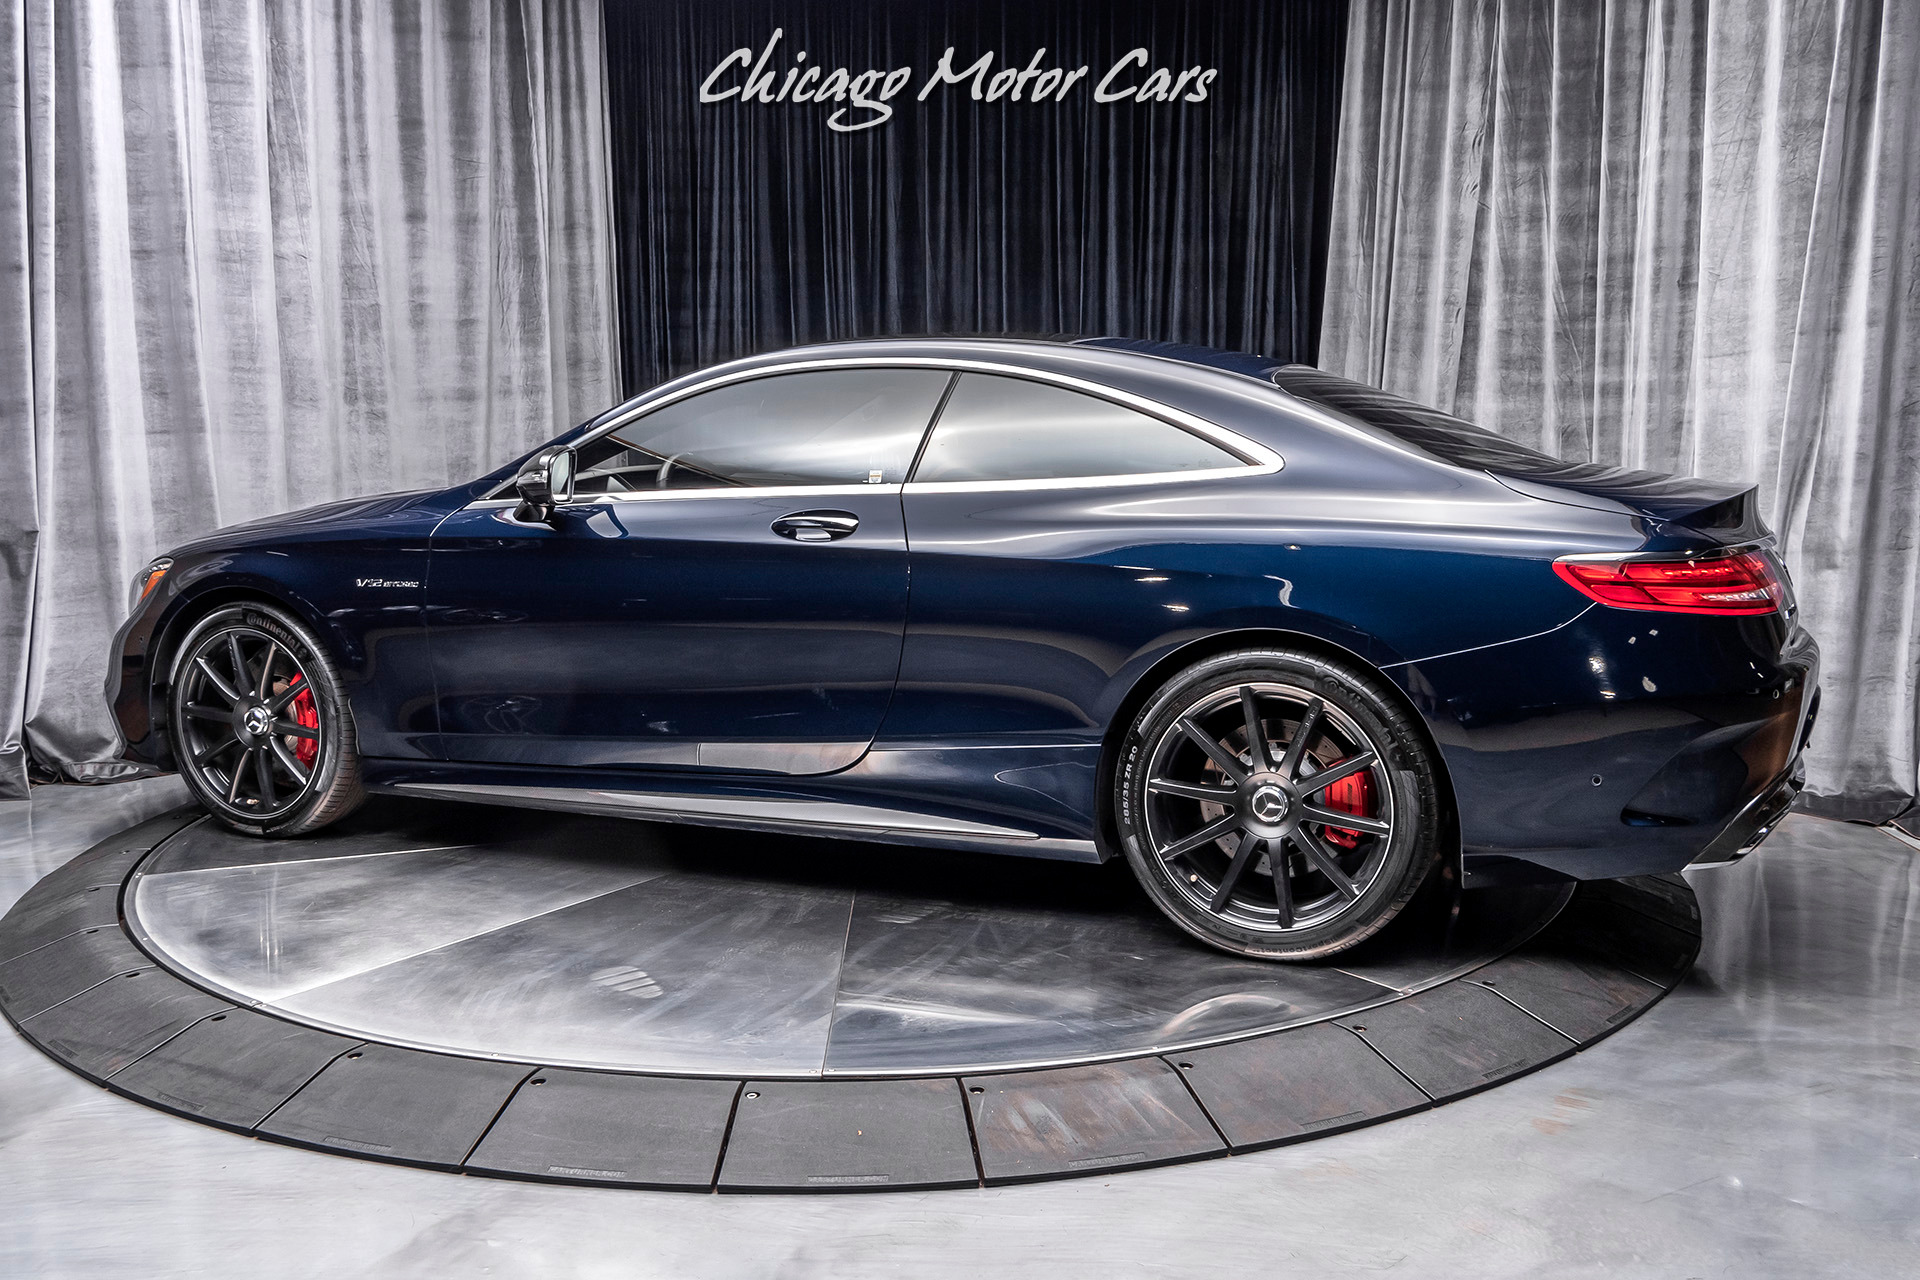 Used-2016-Mercedes-Benz-S65-AMG-Coupe-MSRP-247165--AMG-EXTERIOR-CARBON-FIBER-PACKAGE